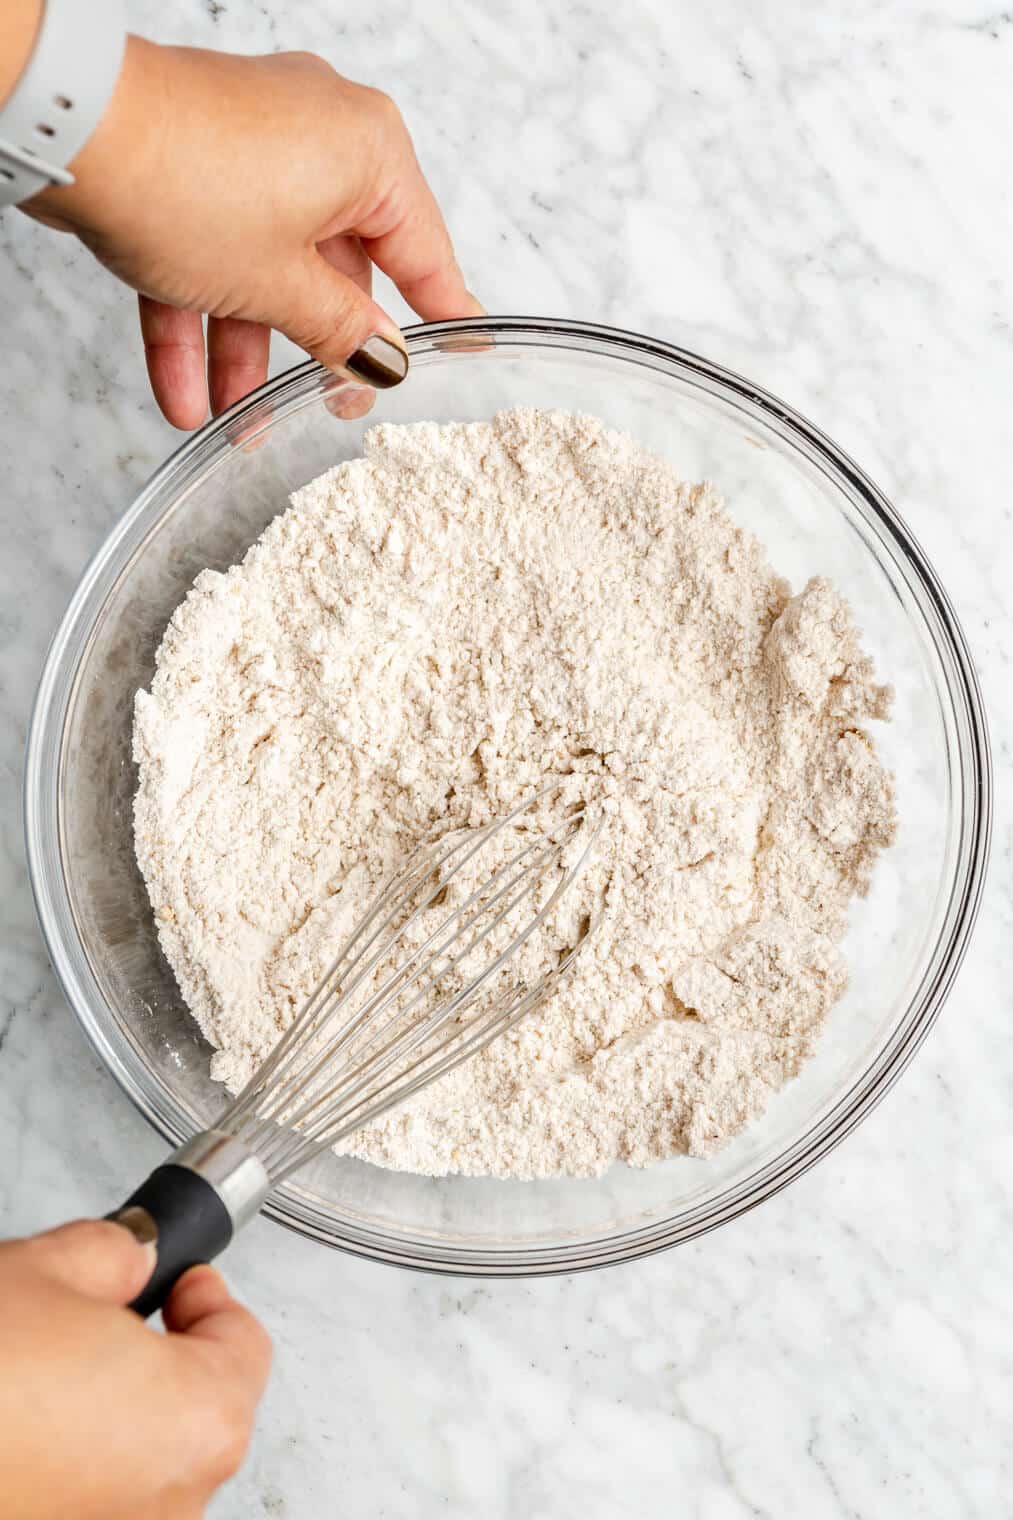 Two hands holding a glass bowl with a whisk mixing together dry flour ingredients in the bowl.